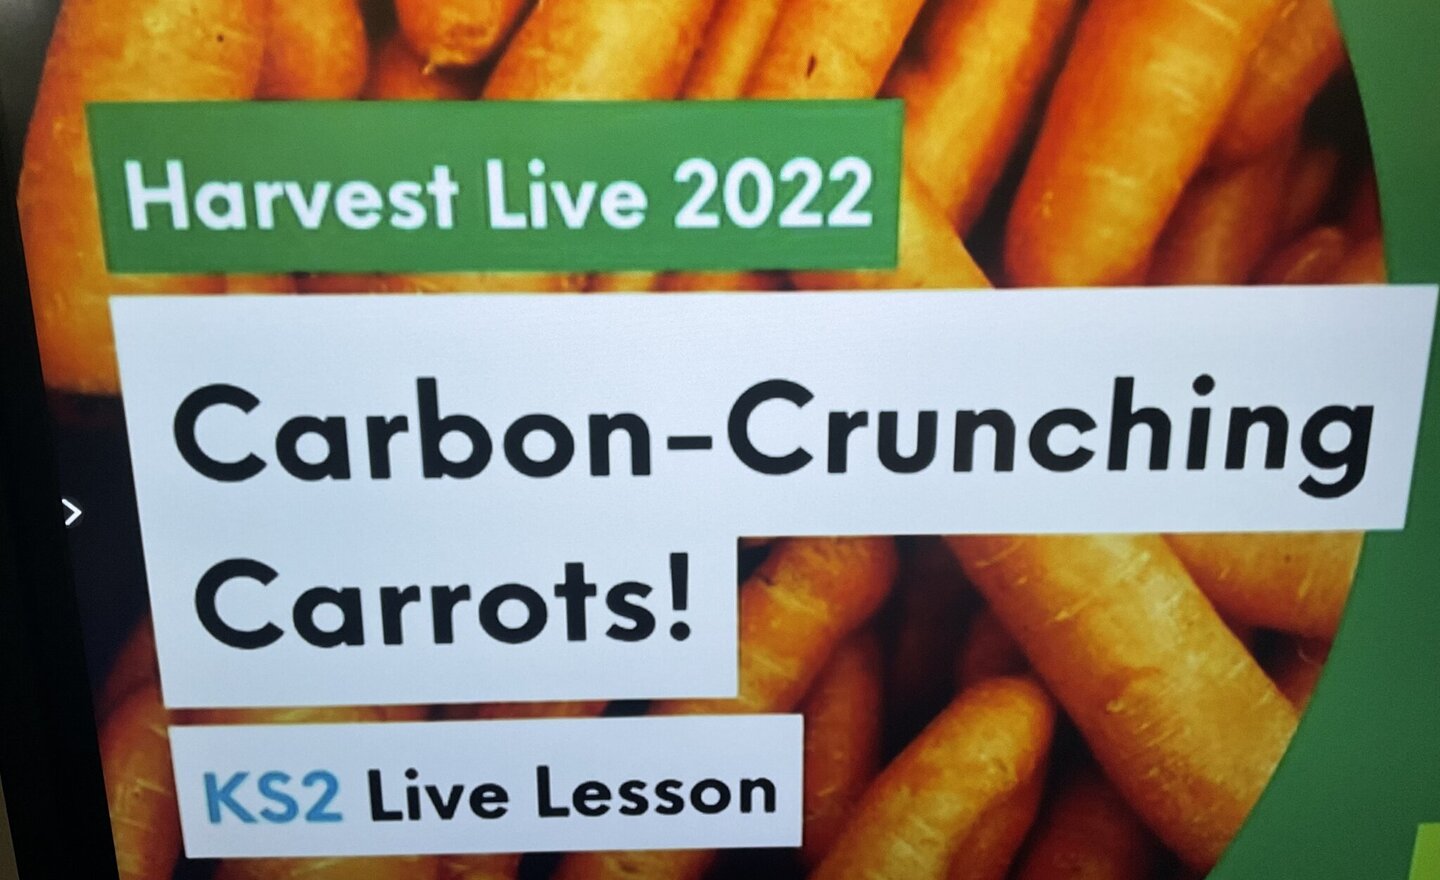 Image of Live Lesson - Carbon Crunching Carrots